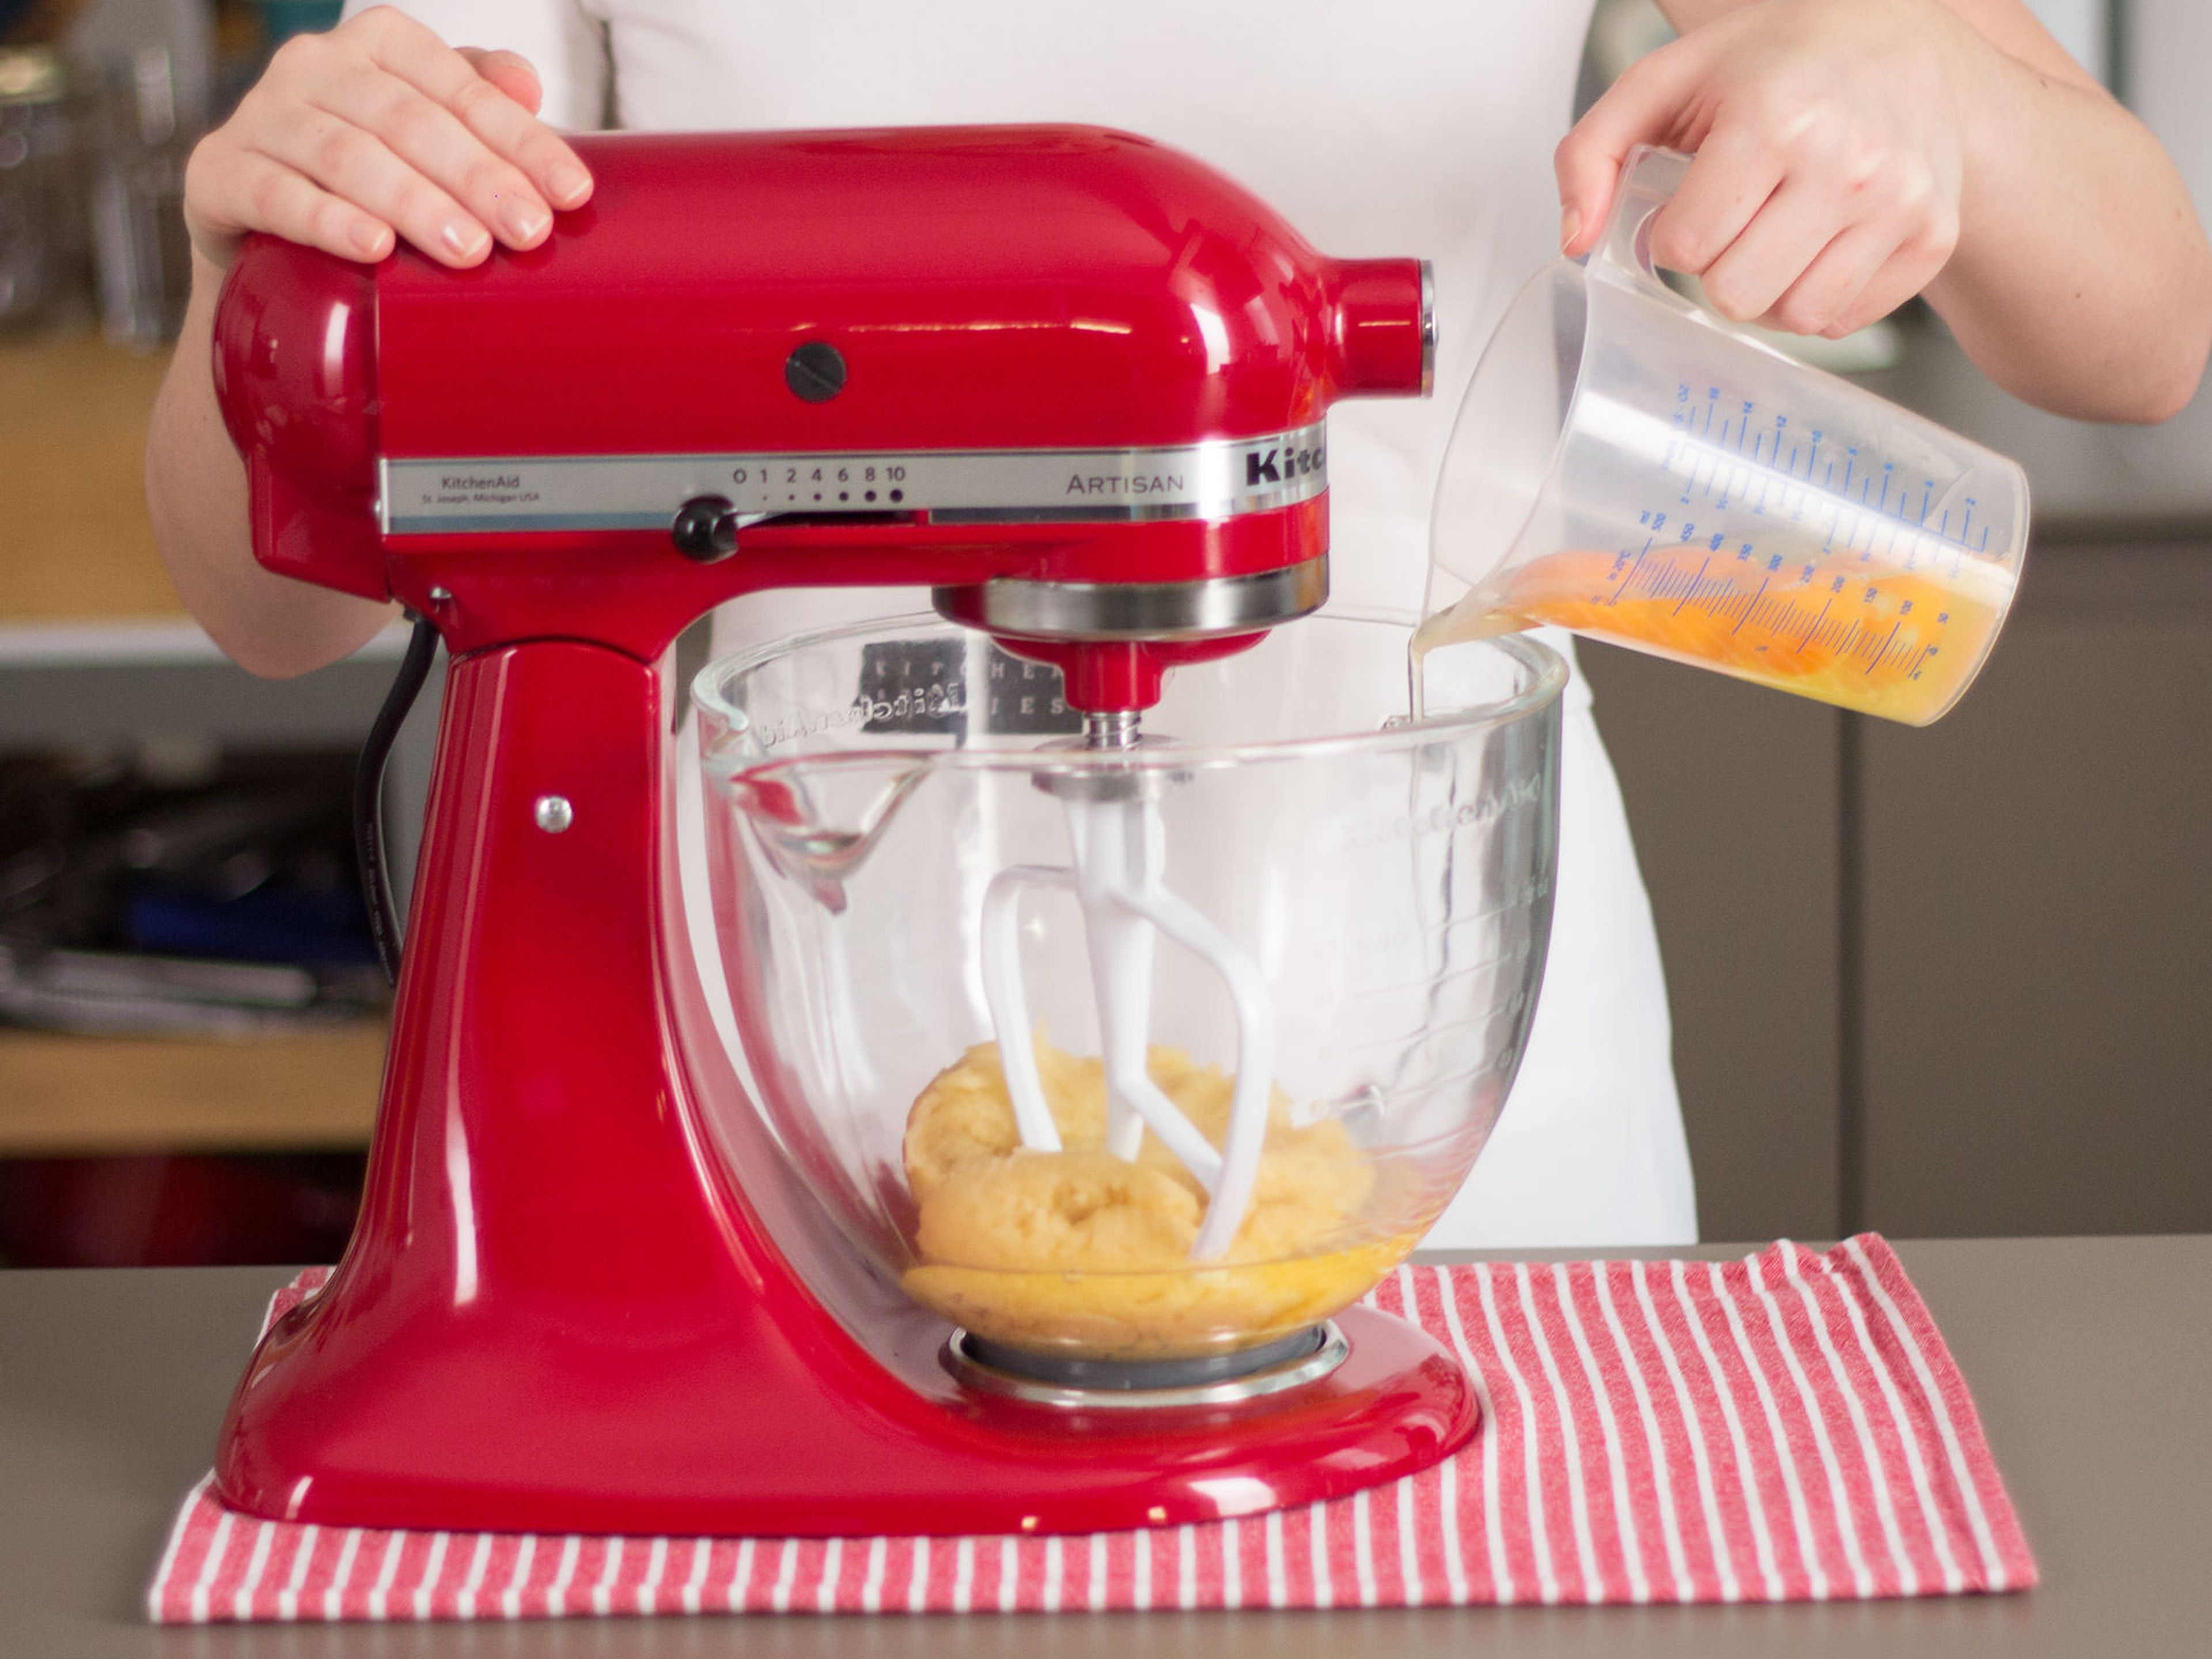 Add eggs to stand mixer and beat until well incorporated and dough is smooth. Transfer dough to a star-tipped piping bag.